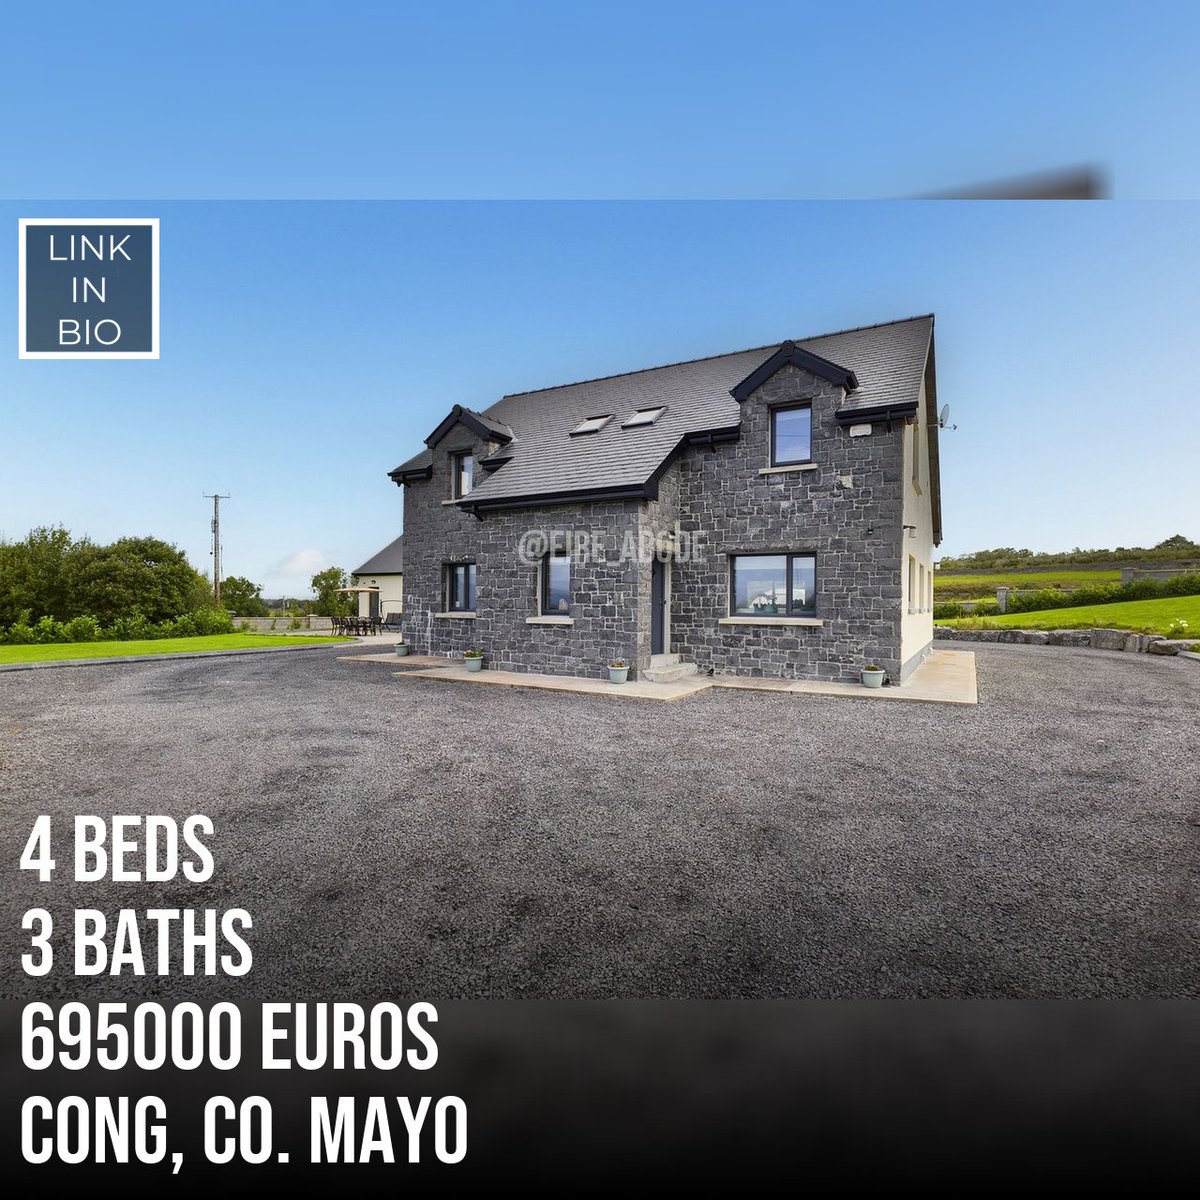 'Property for sale. Price is 695000, there are 4 Bedrooms and 3 Bathrooms.'#homes  #propertymarketing #realestatelife  #propertysales #realestate #realestateagent #PropertyListing #ireland  #irishproperty  #dreamhome  #house  #realestate  #home  #inspiration  #realestateinvesting